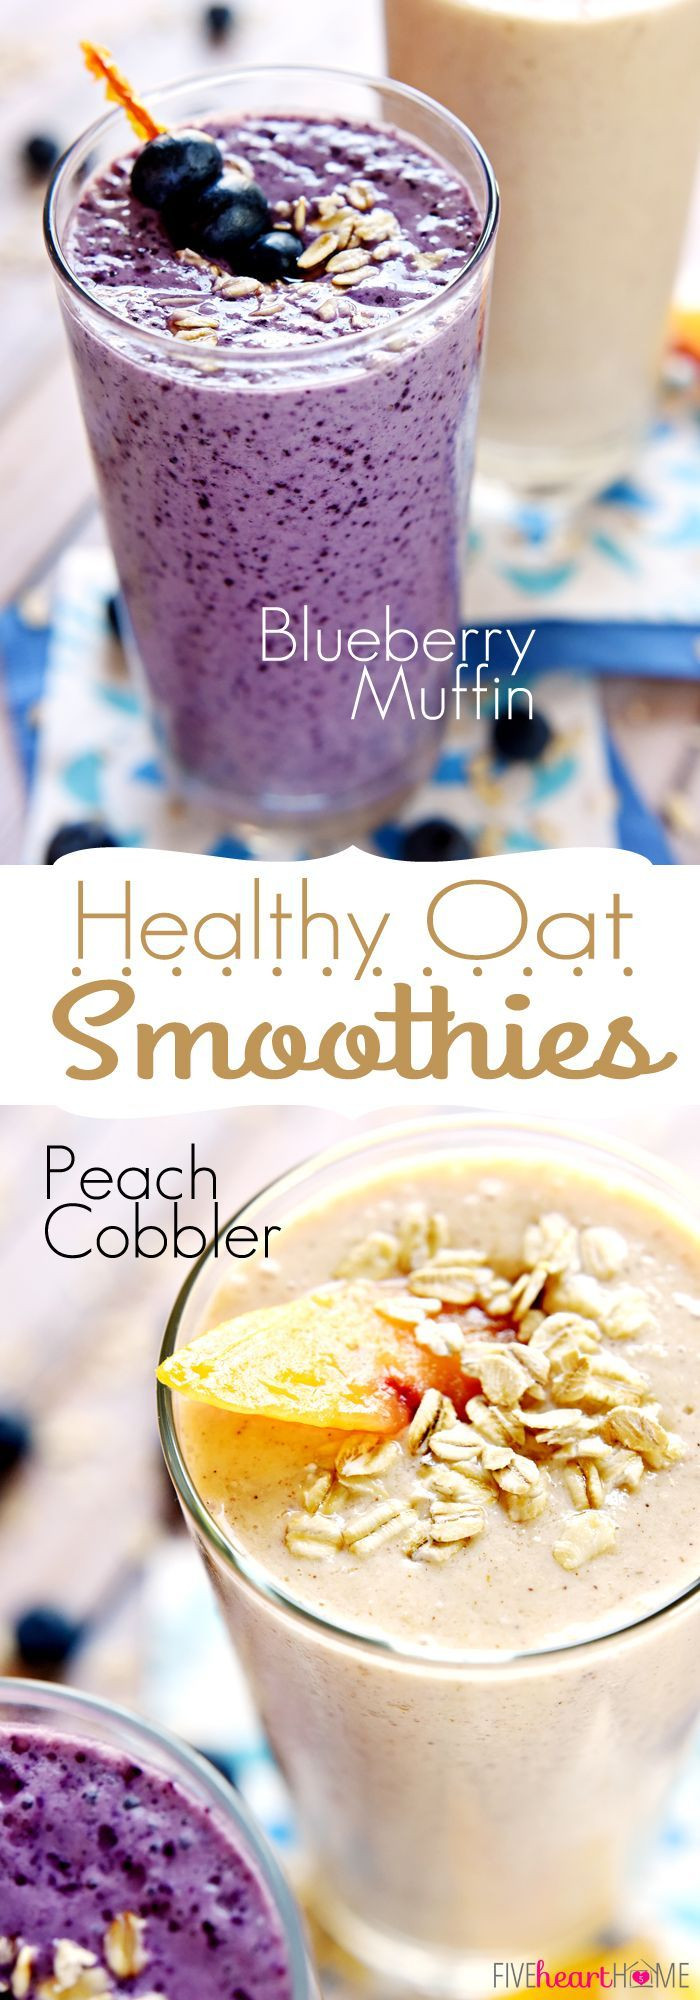 Healthy Filling Smoothies
 Healthy Oat Smoothies Blueberry Muffin & Peach Cobbler